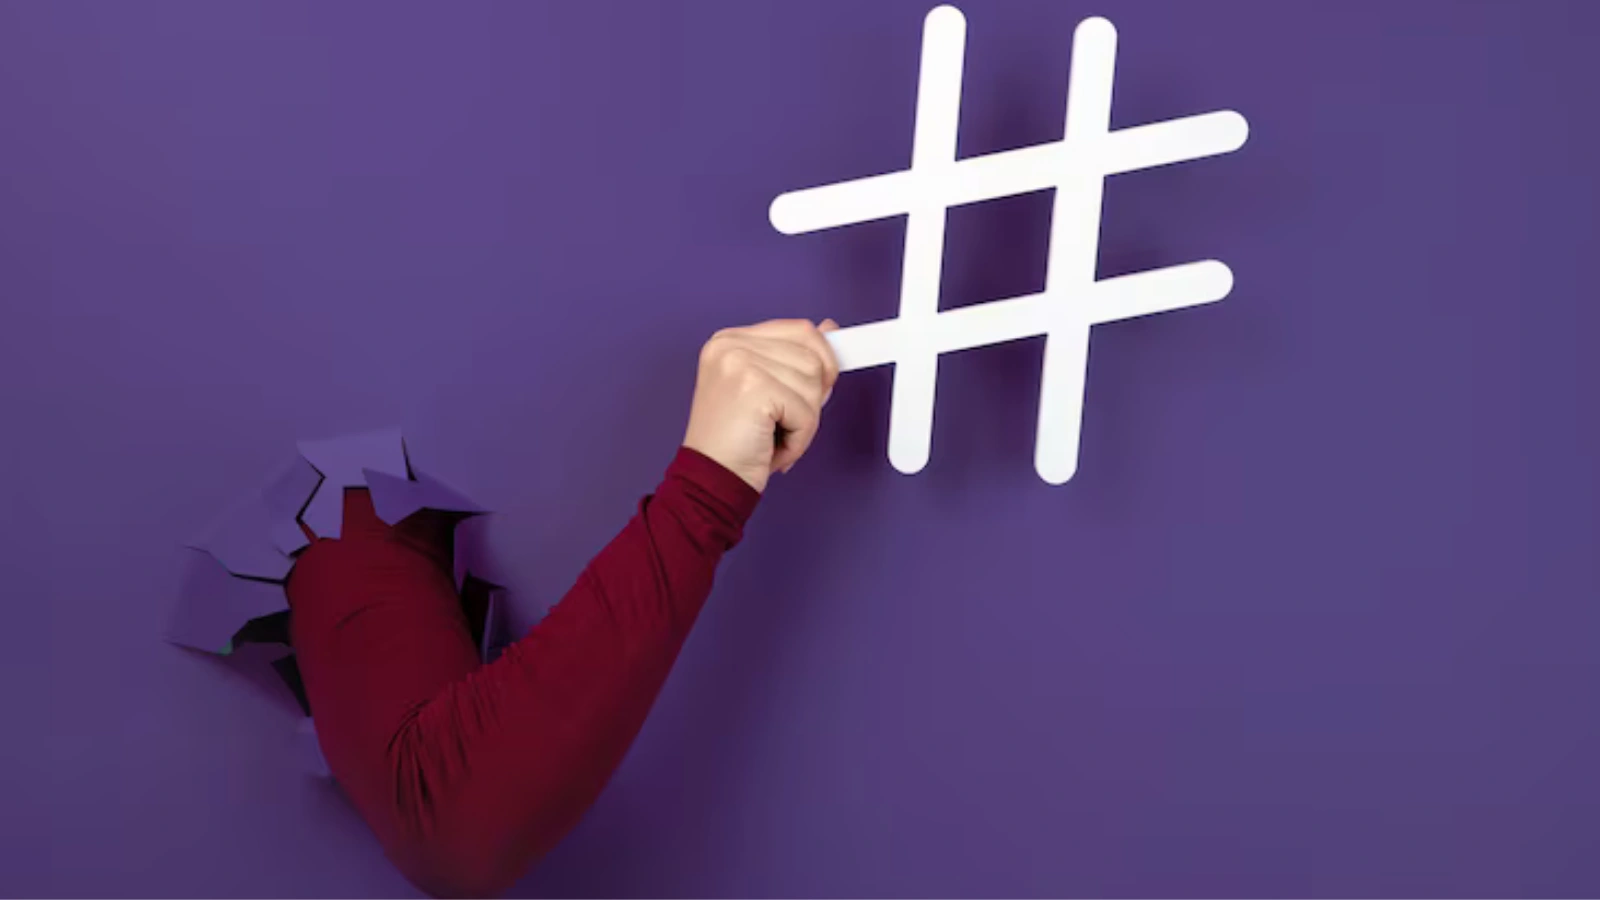 hashtags-in-video-campaign-ideas